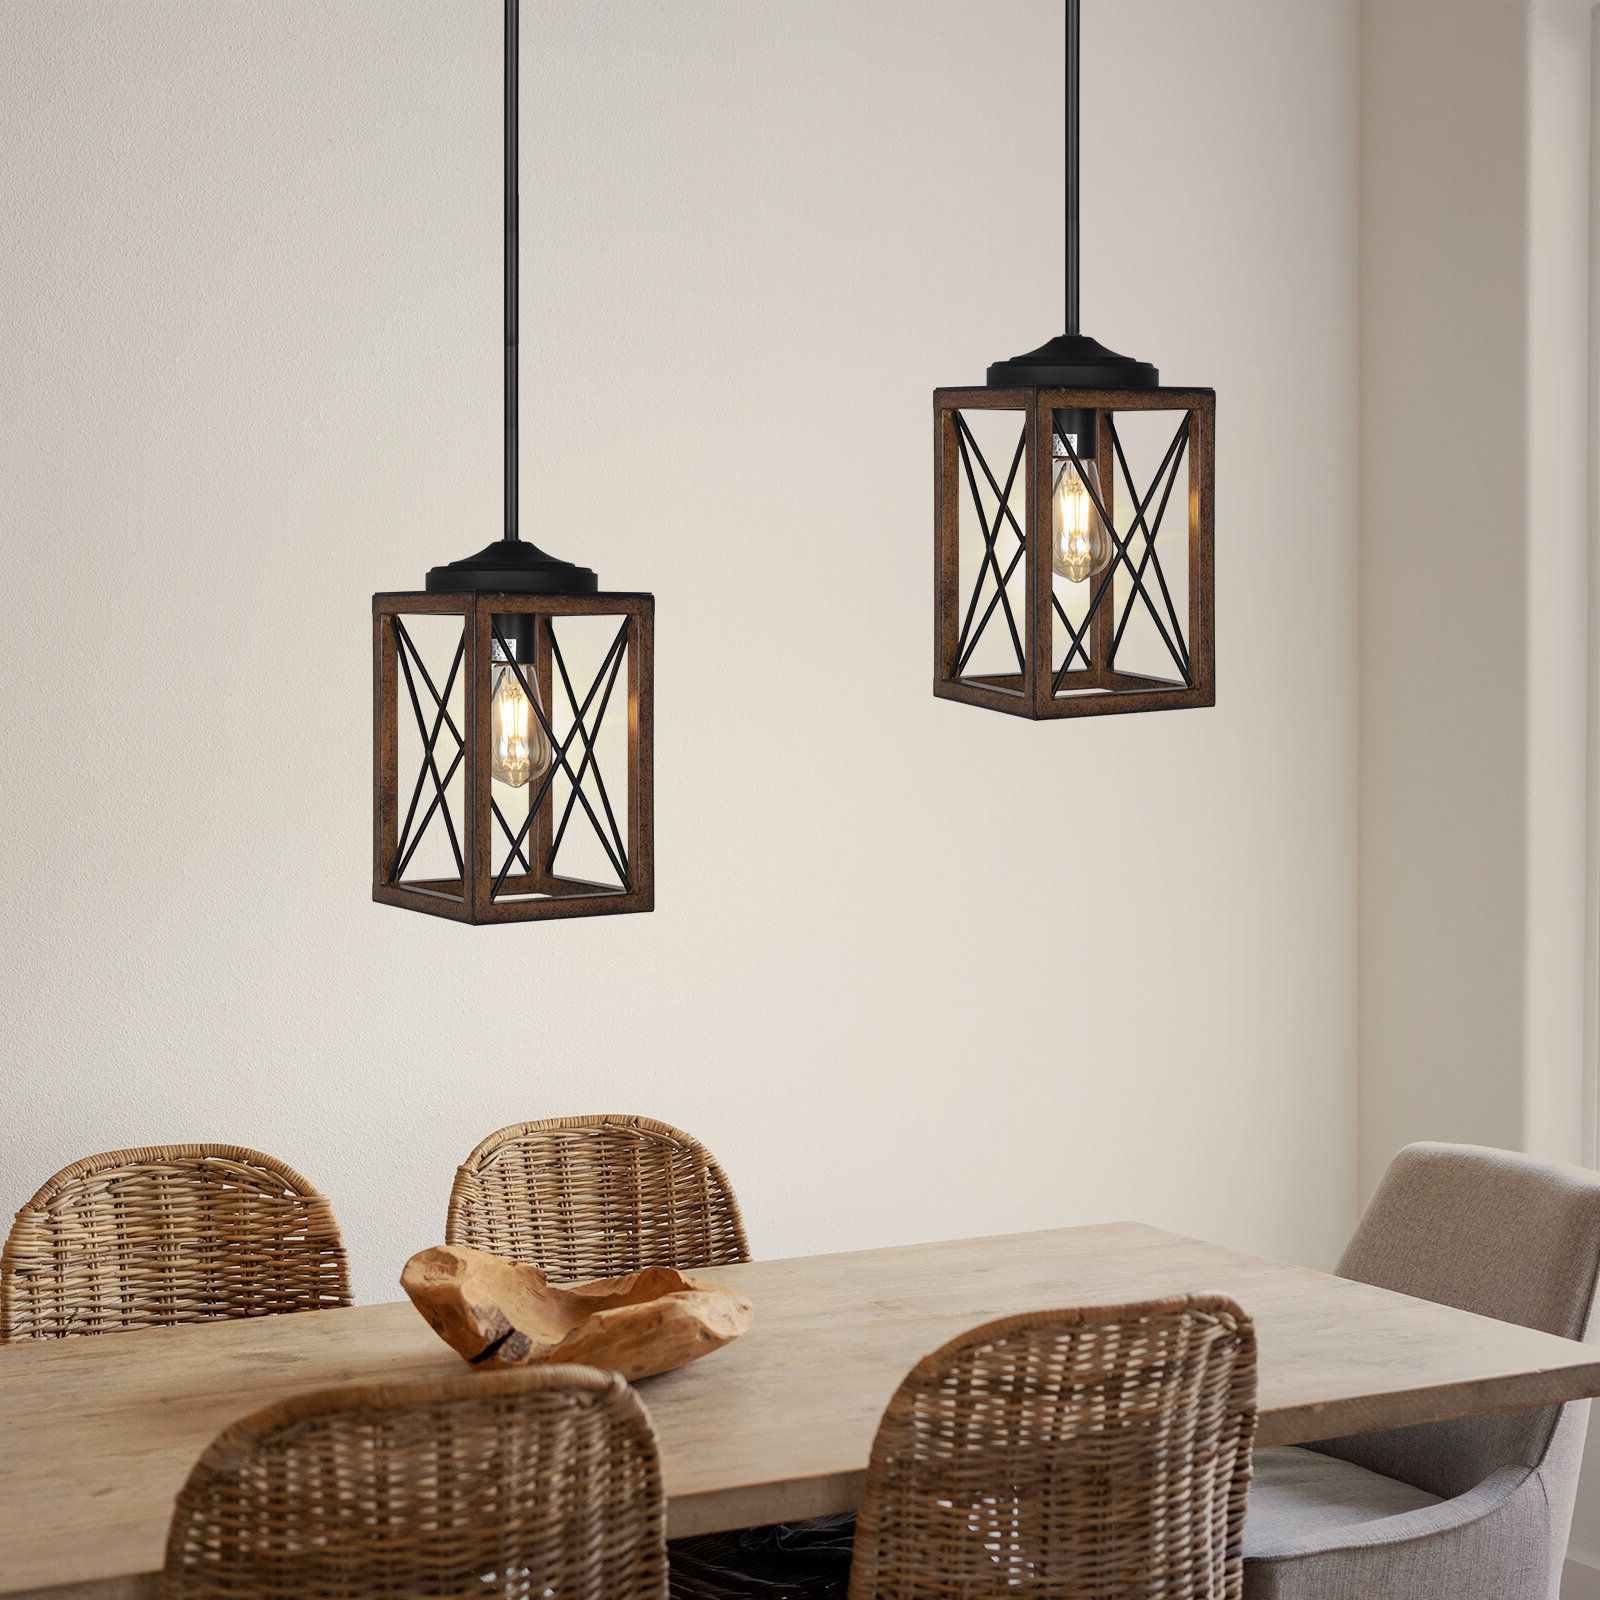 Wayfair Pertaining To Two Light Lantern Chandeliers (View 1 of 15)